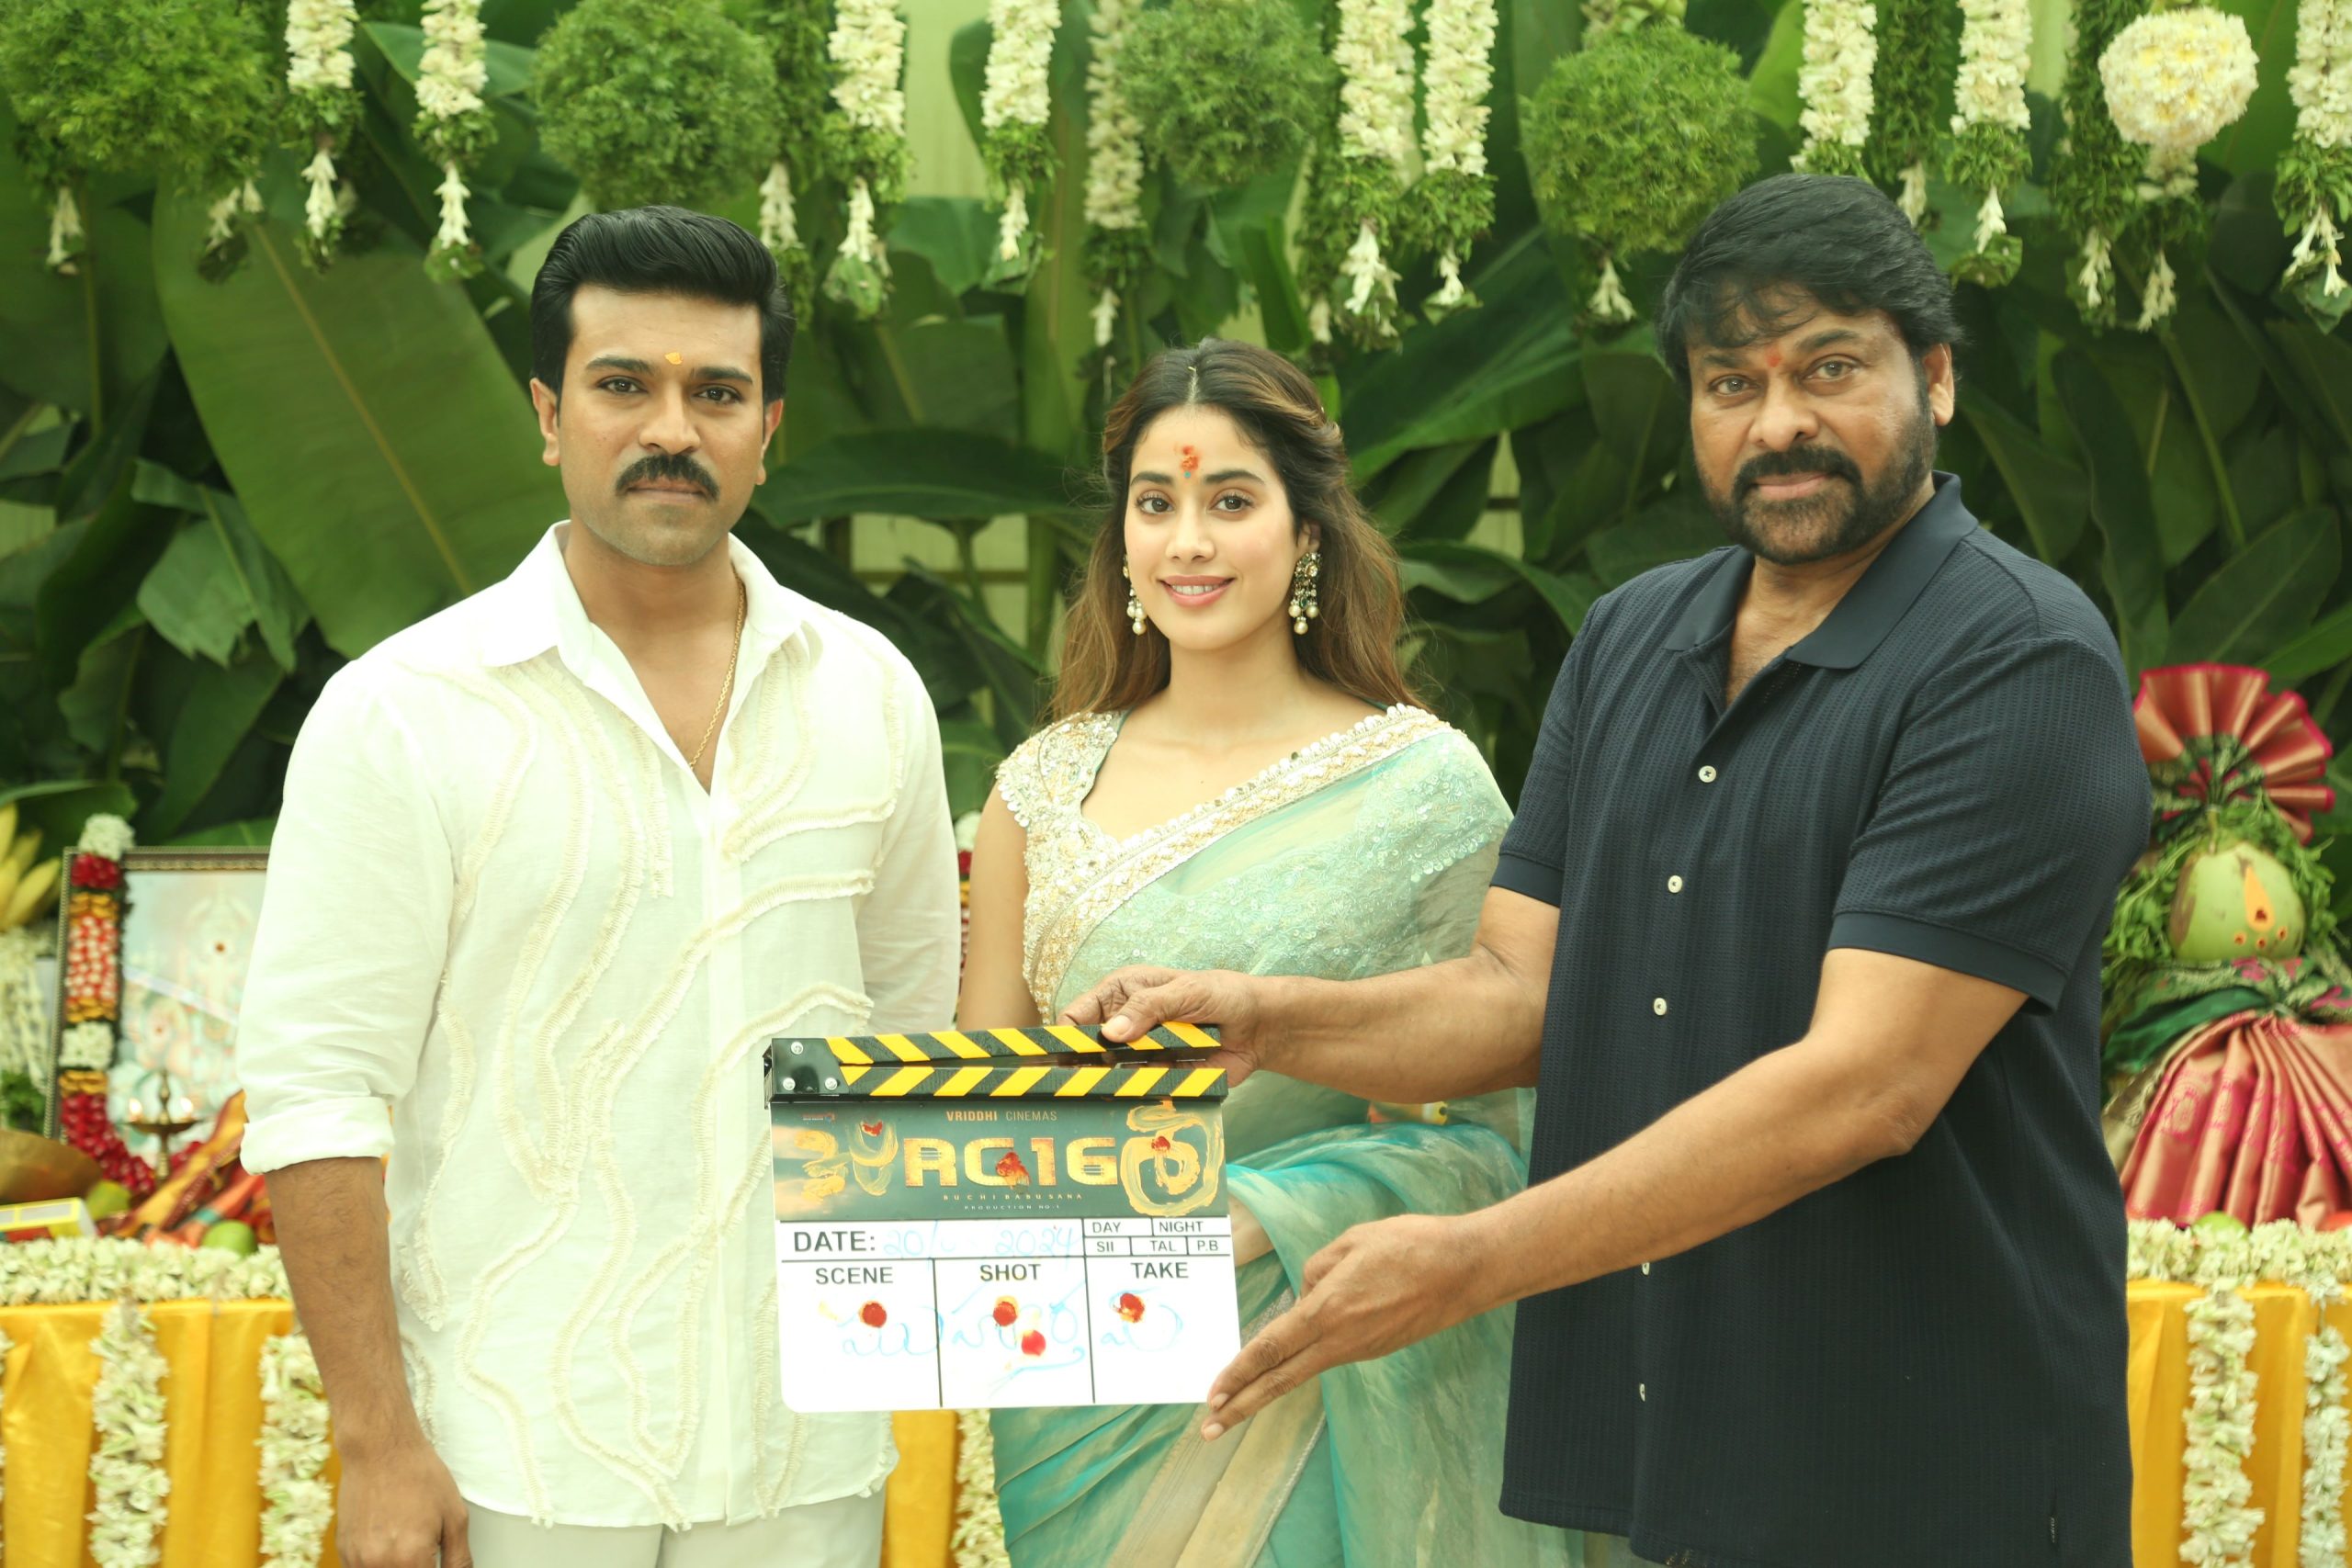 R C 16 Movie Launched